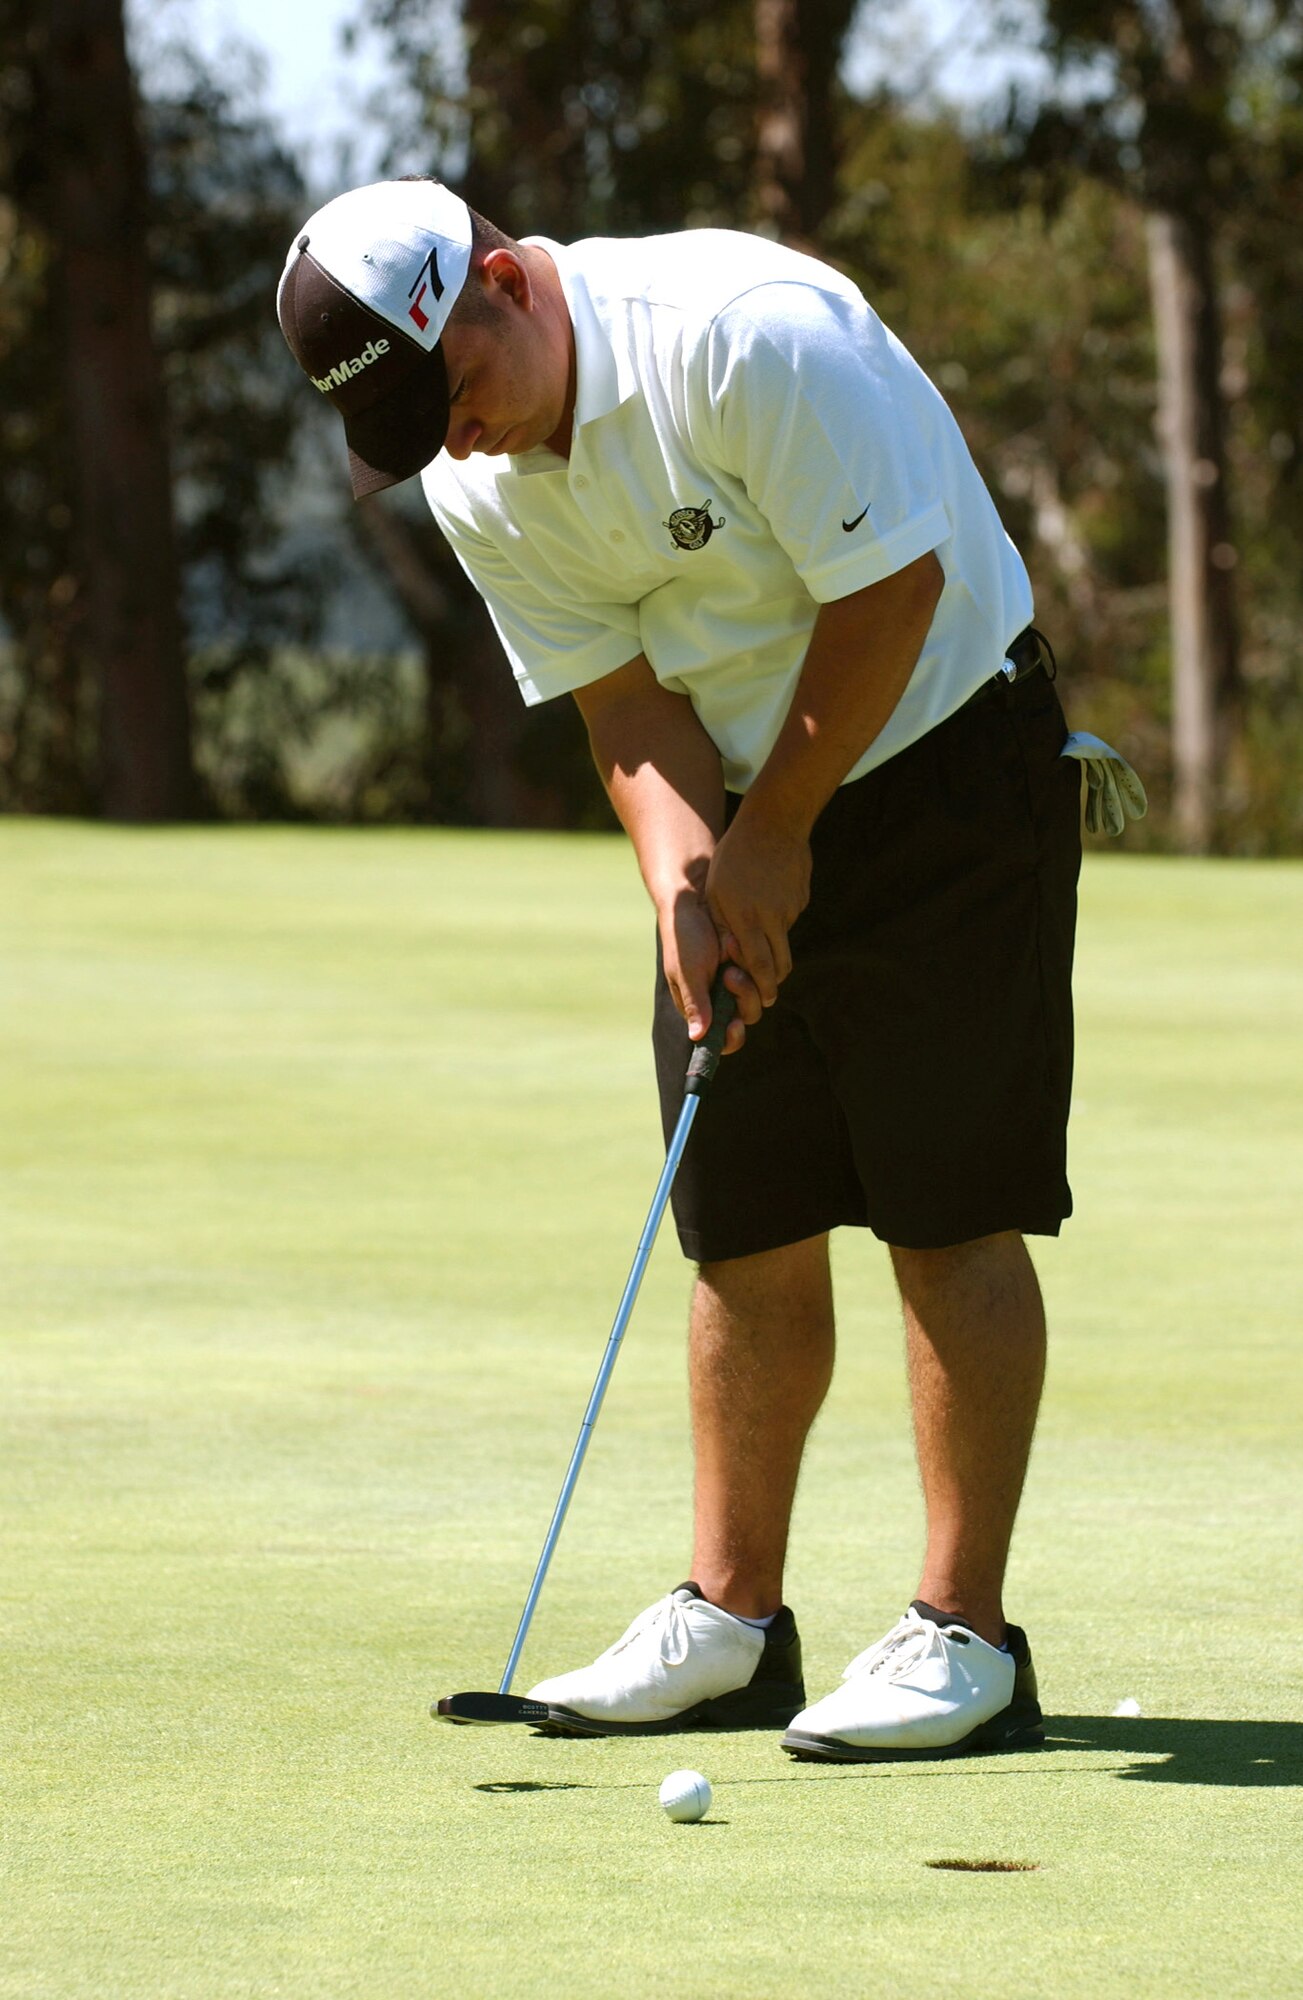 The Air Force's Arnell Garza putts for birdie during the 2006 Armed Forces Golf Championship at Vandenberg Air Force Base, Calif., on Aug. 9.  Air Force golfers took top honors in tournament, winning the men's and women's team competitions as well as the individual men's and women's competitions.  Garza is stationed at Fairchild Air Force Base, Wash. (U.S. Air Force photo/Senior Airman Vanessa Valentine)